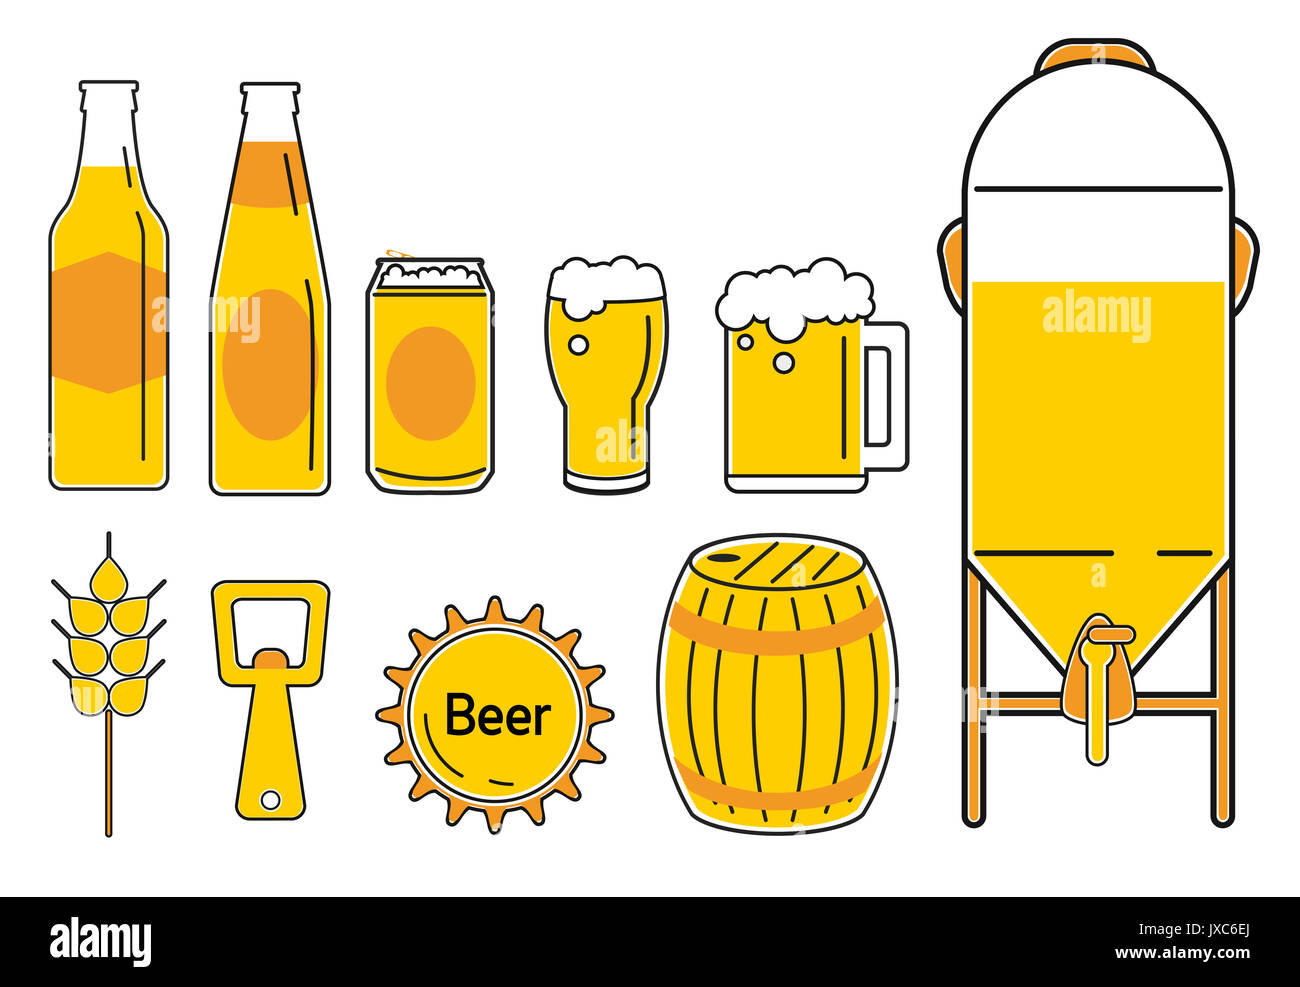 beer icon line cartoon vecter graphic or illustrations Stock Photo